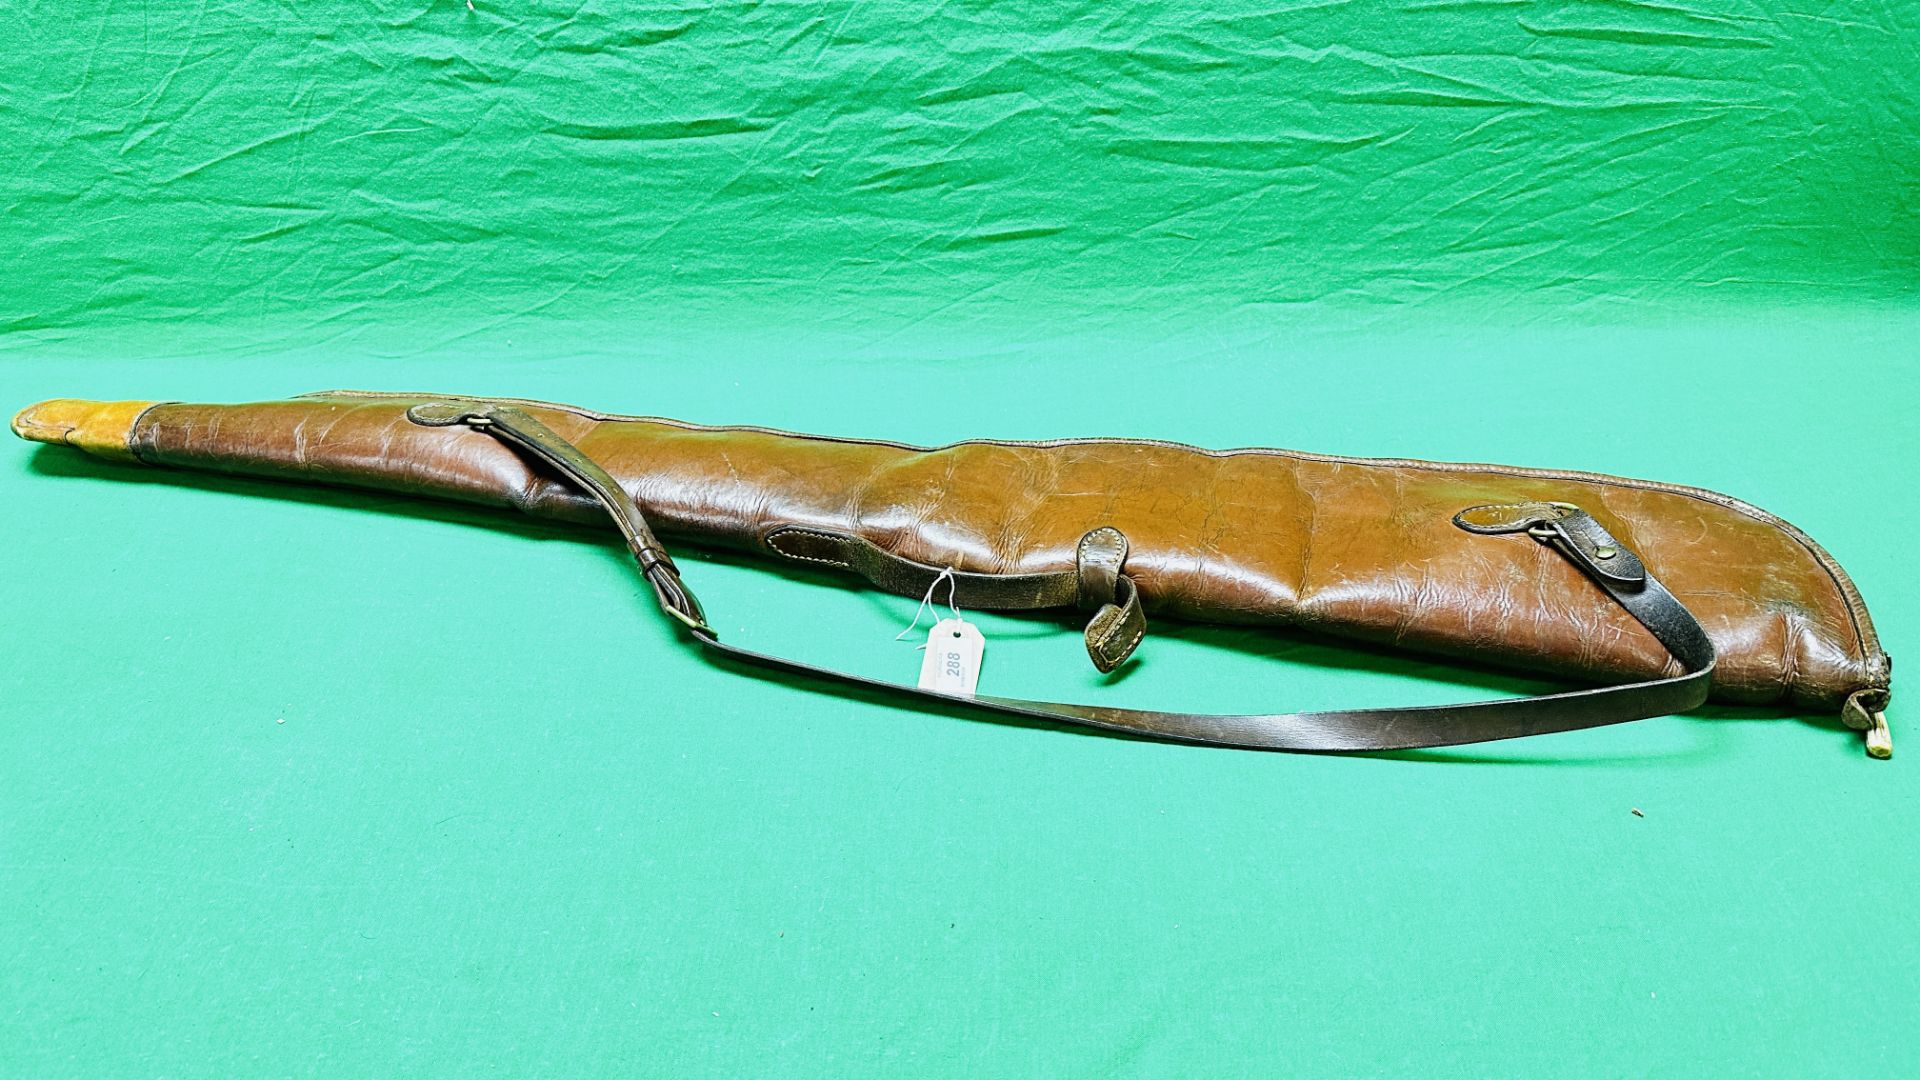 A GOOD QUALITY LEATHER AND SHEEP SKIN LINED GUN SLIP